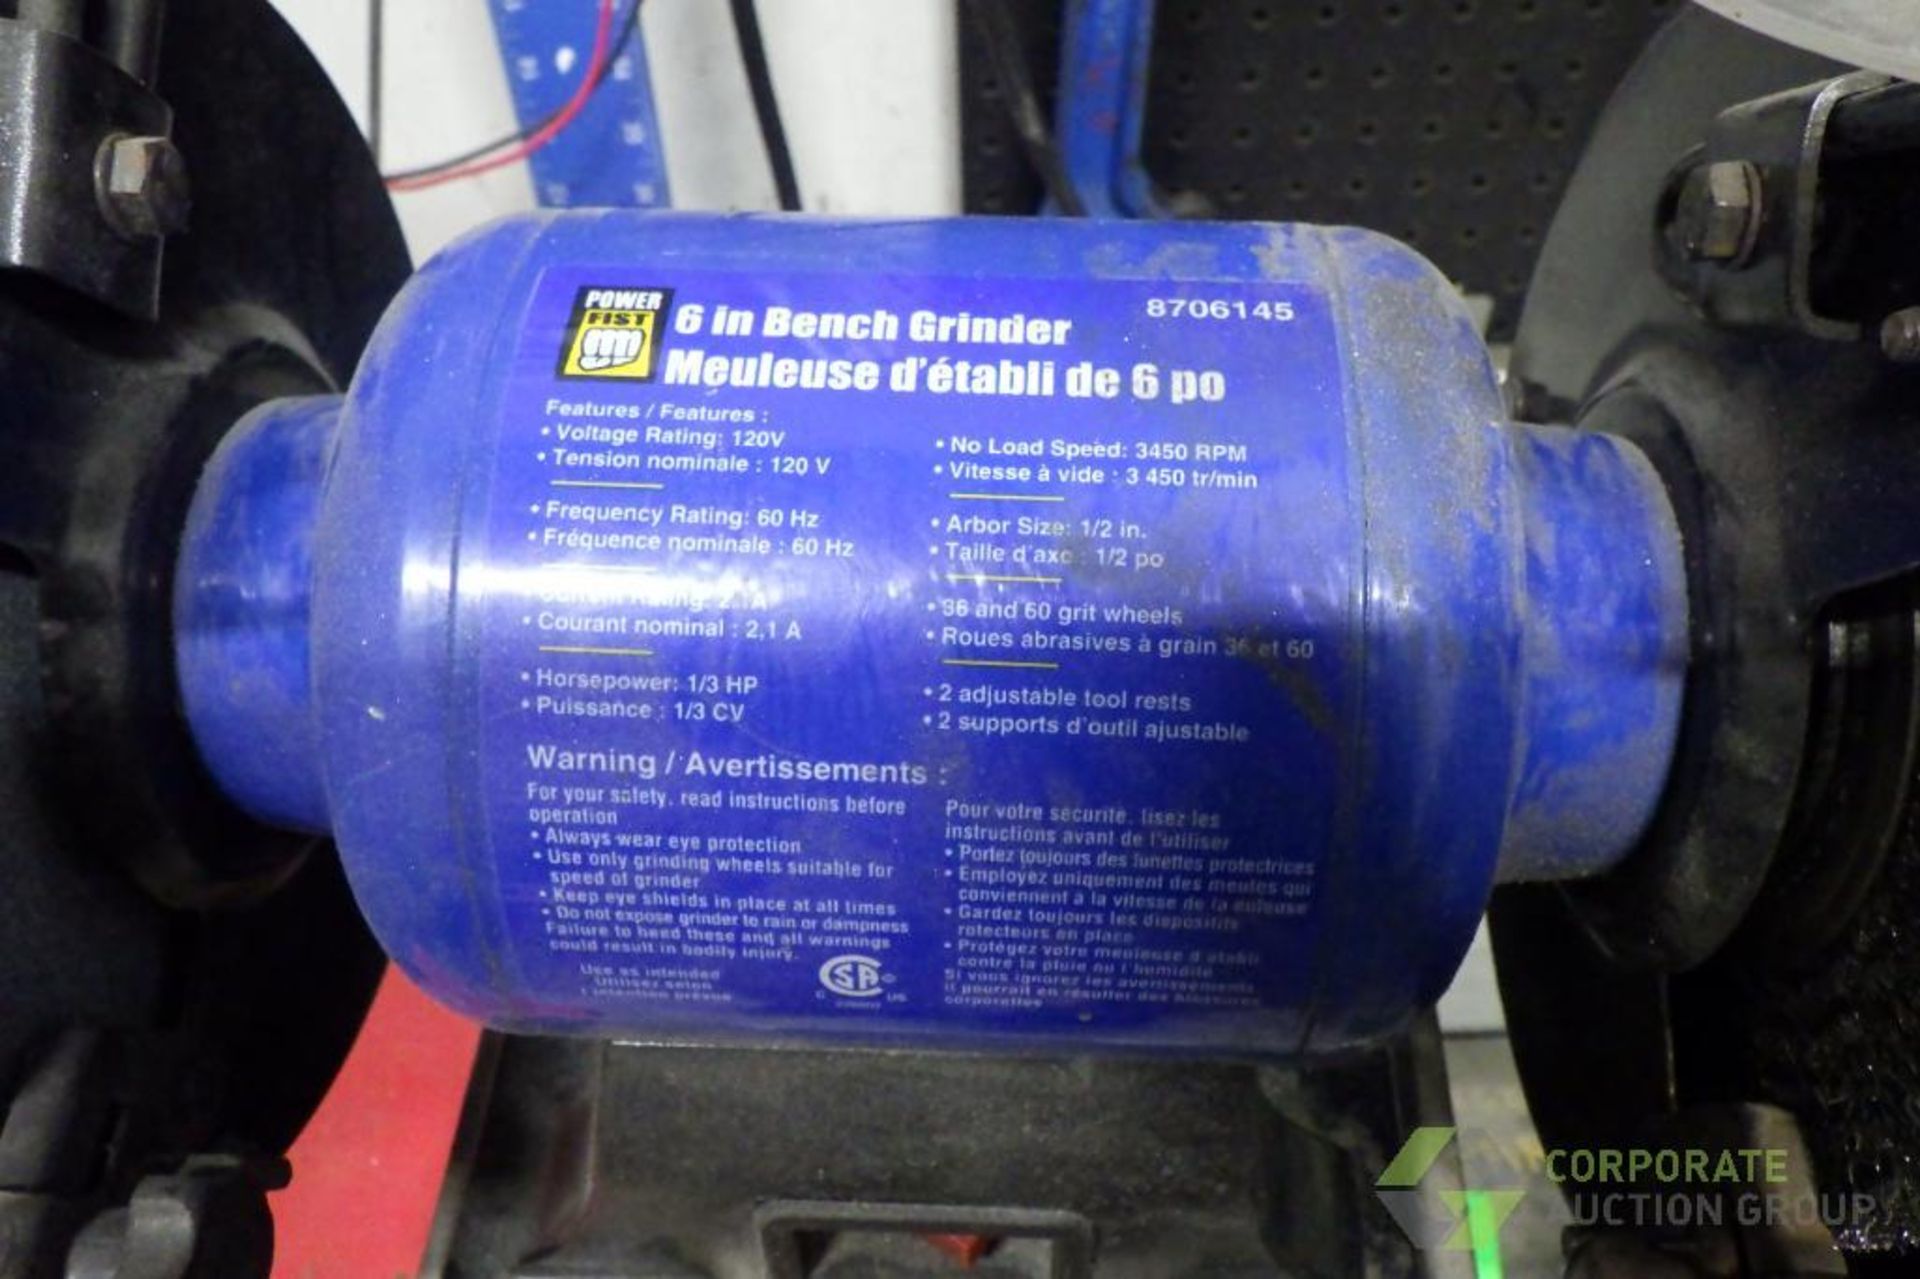 Power Fist 6 in. bench grinder - Image 4 of 6